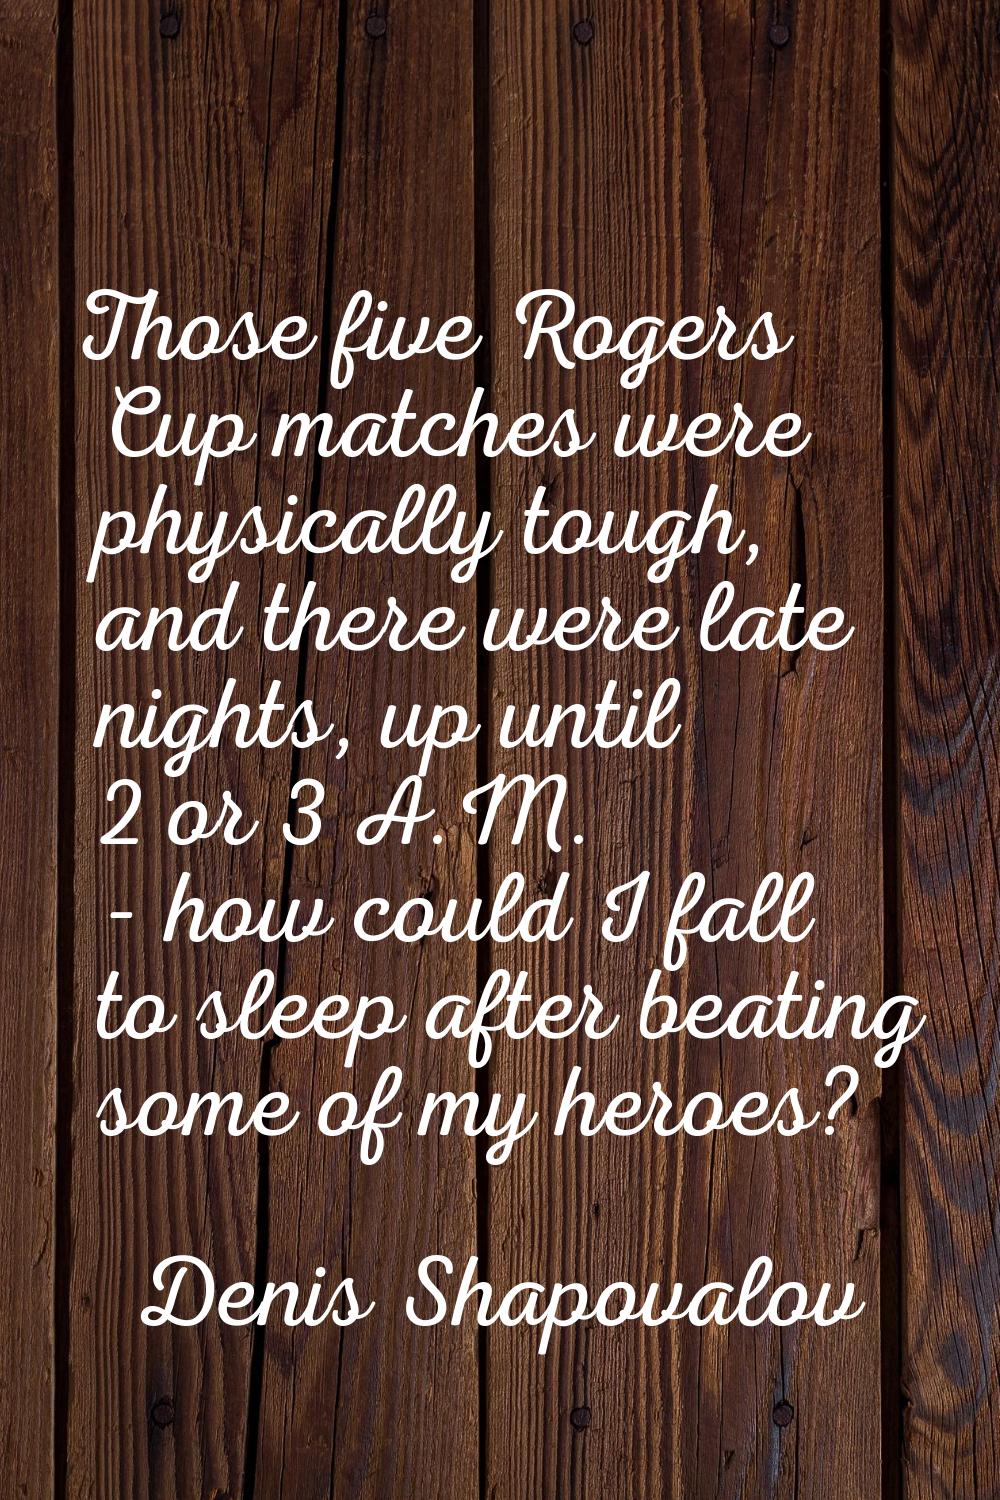 Those five Rogers Cup matches were physically tough, and there were late nights, up until 2 or 3 A.